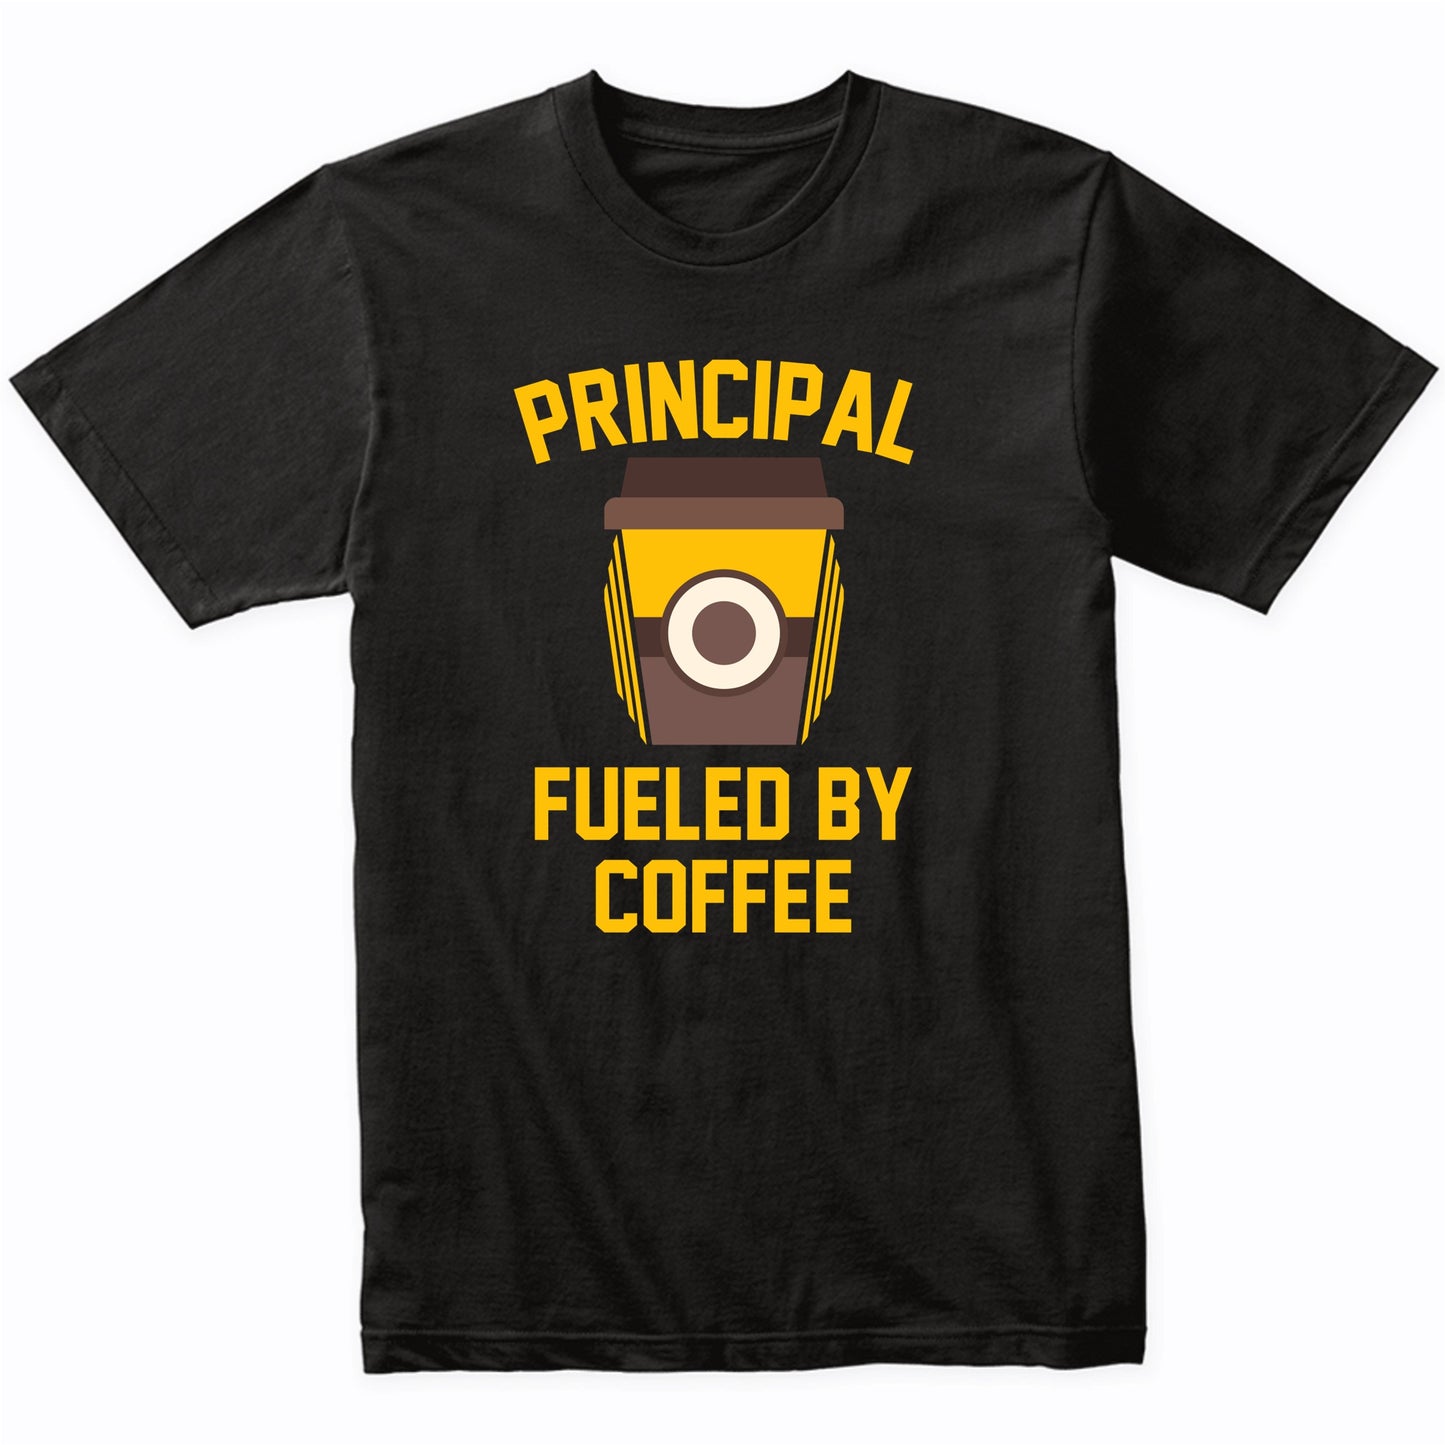 Principal Fueled By Coffee Funny Shirt